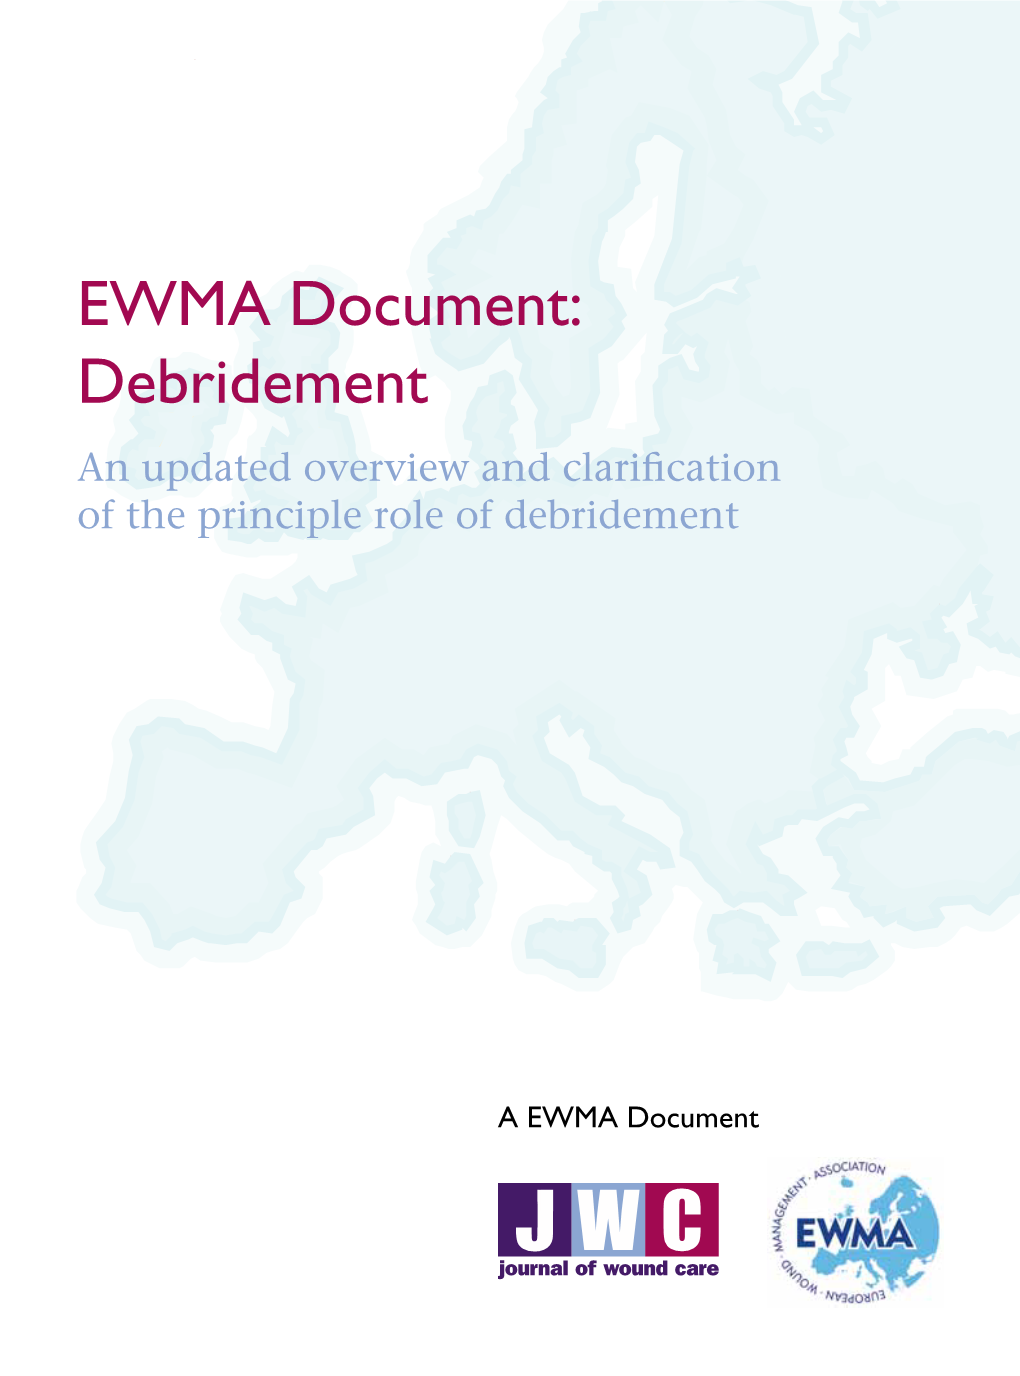 EWMA Document: Debridement an Updated Overview and Clarification of the Principle Role of Debridement